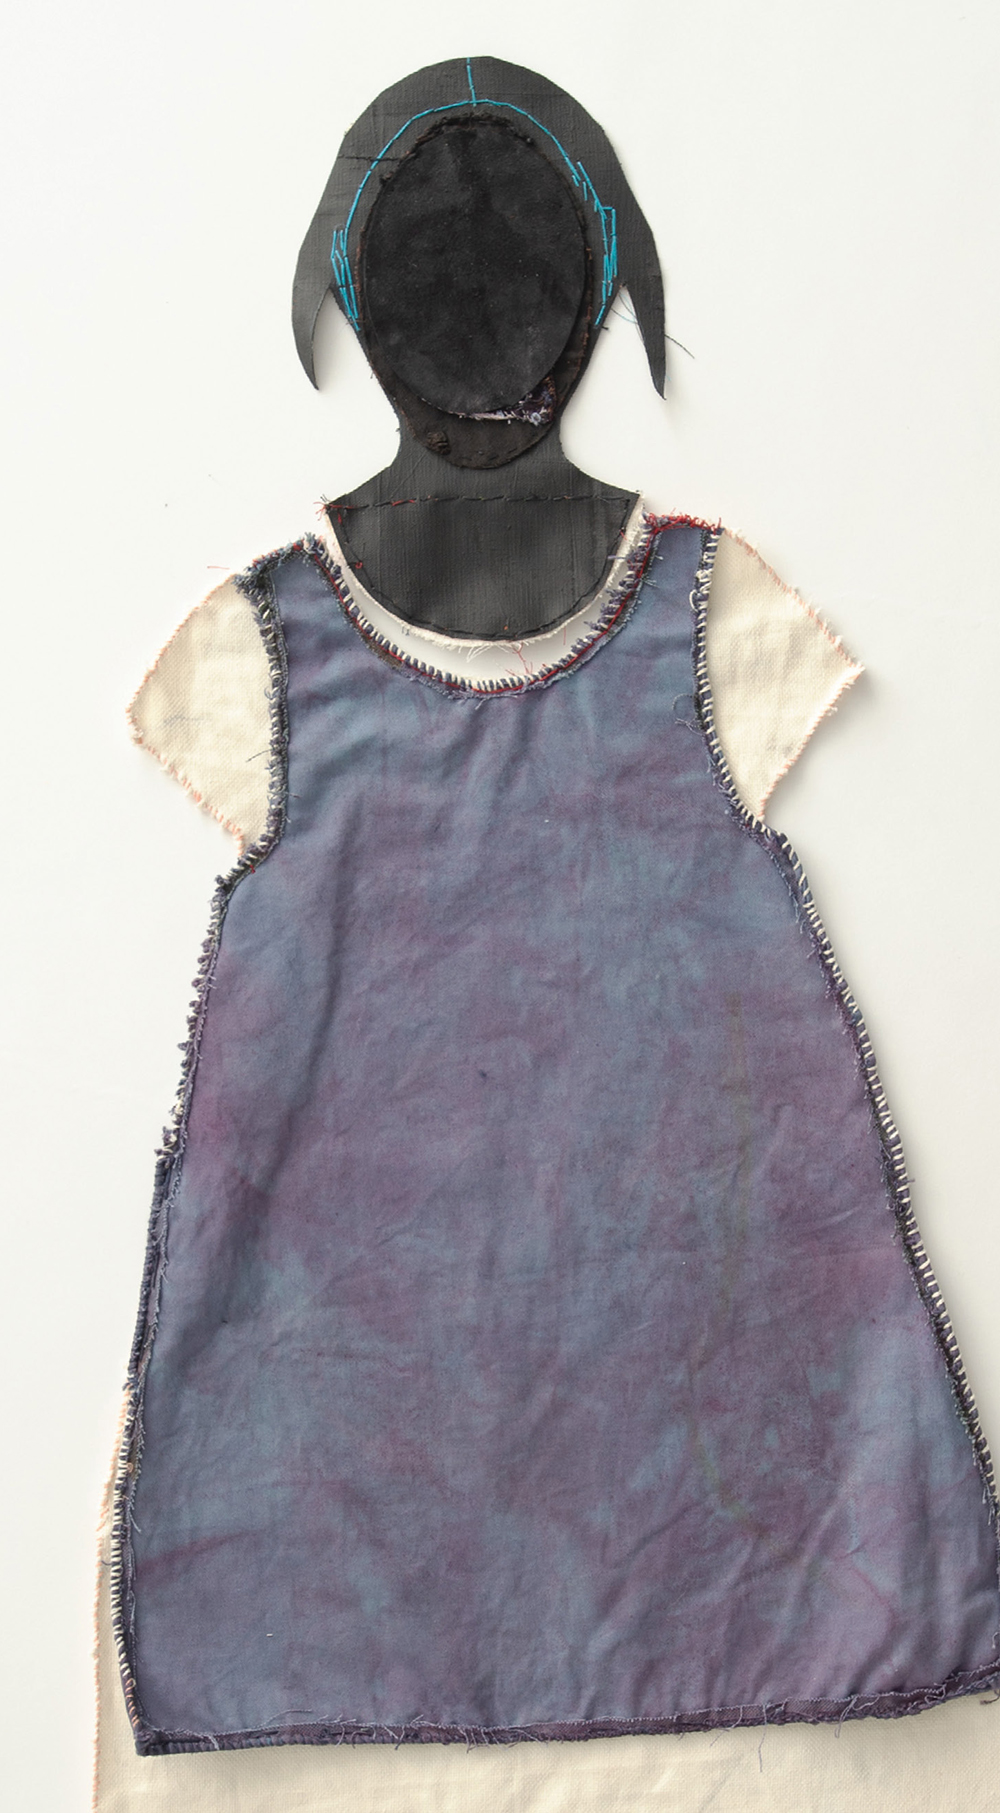 Mixed media assemblage of clothes for a young black woman